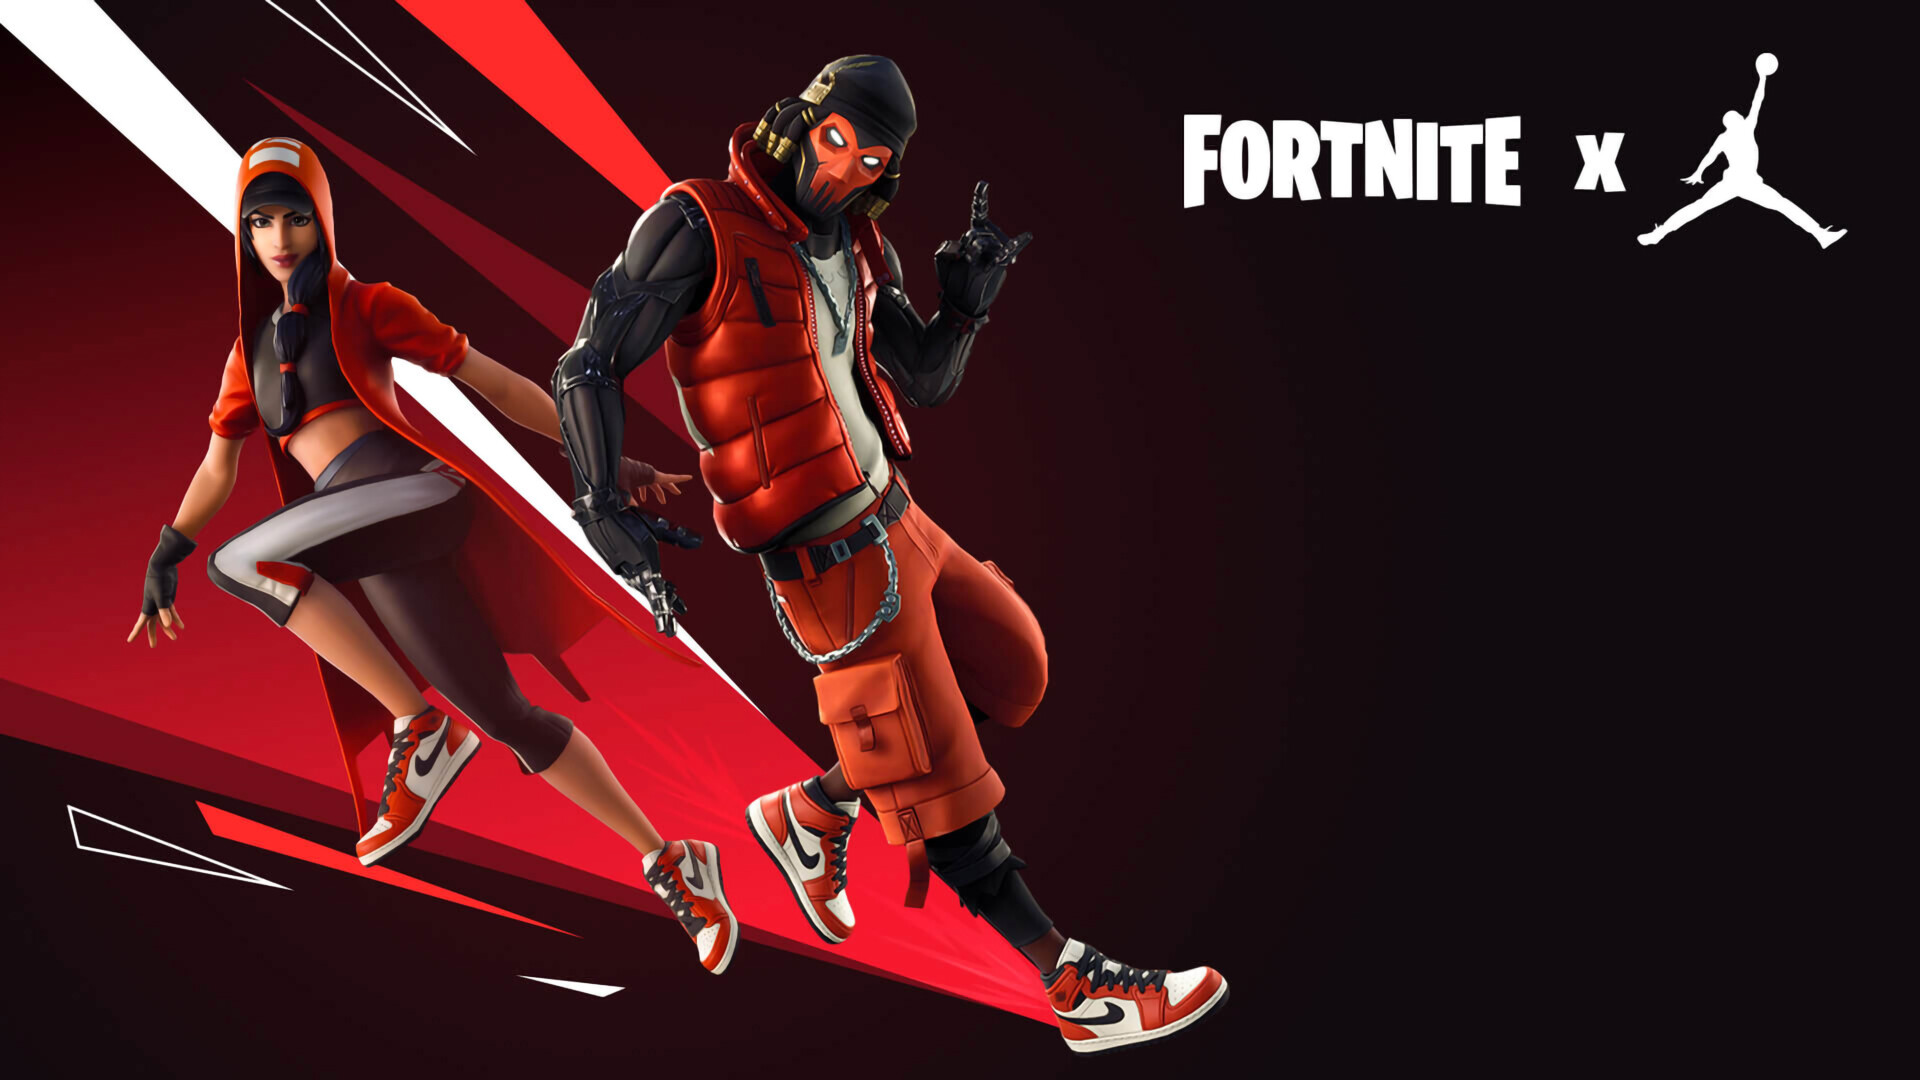 Fortnite: Jordan skin, A survival game where 100 players fight against each other. 1920x1080 Full HD Background.